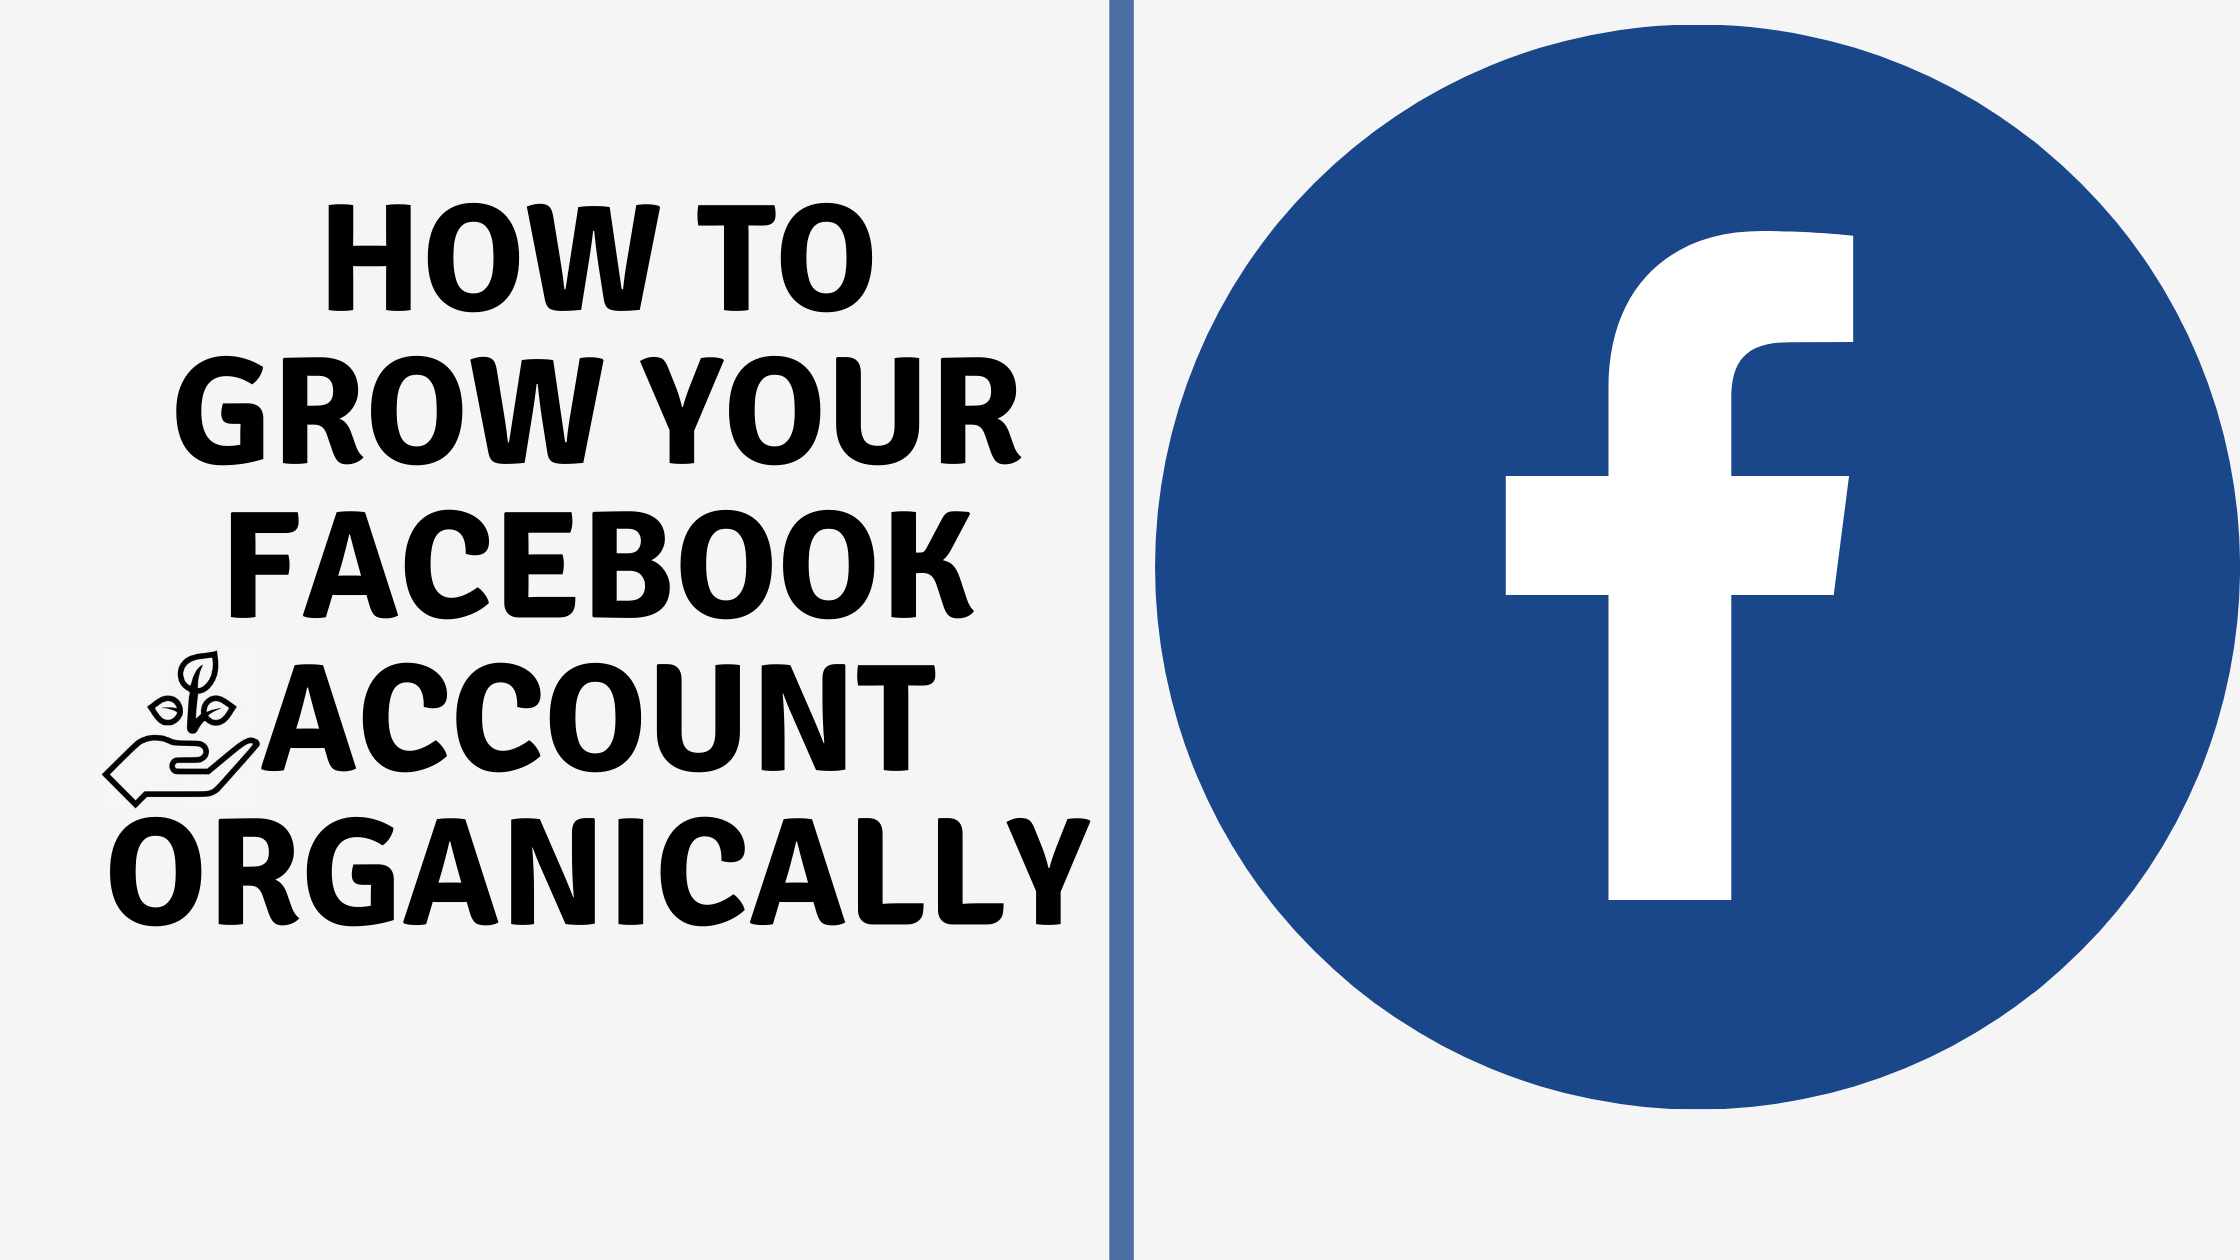 How To Grow Your Facebook Account Organically In 21